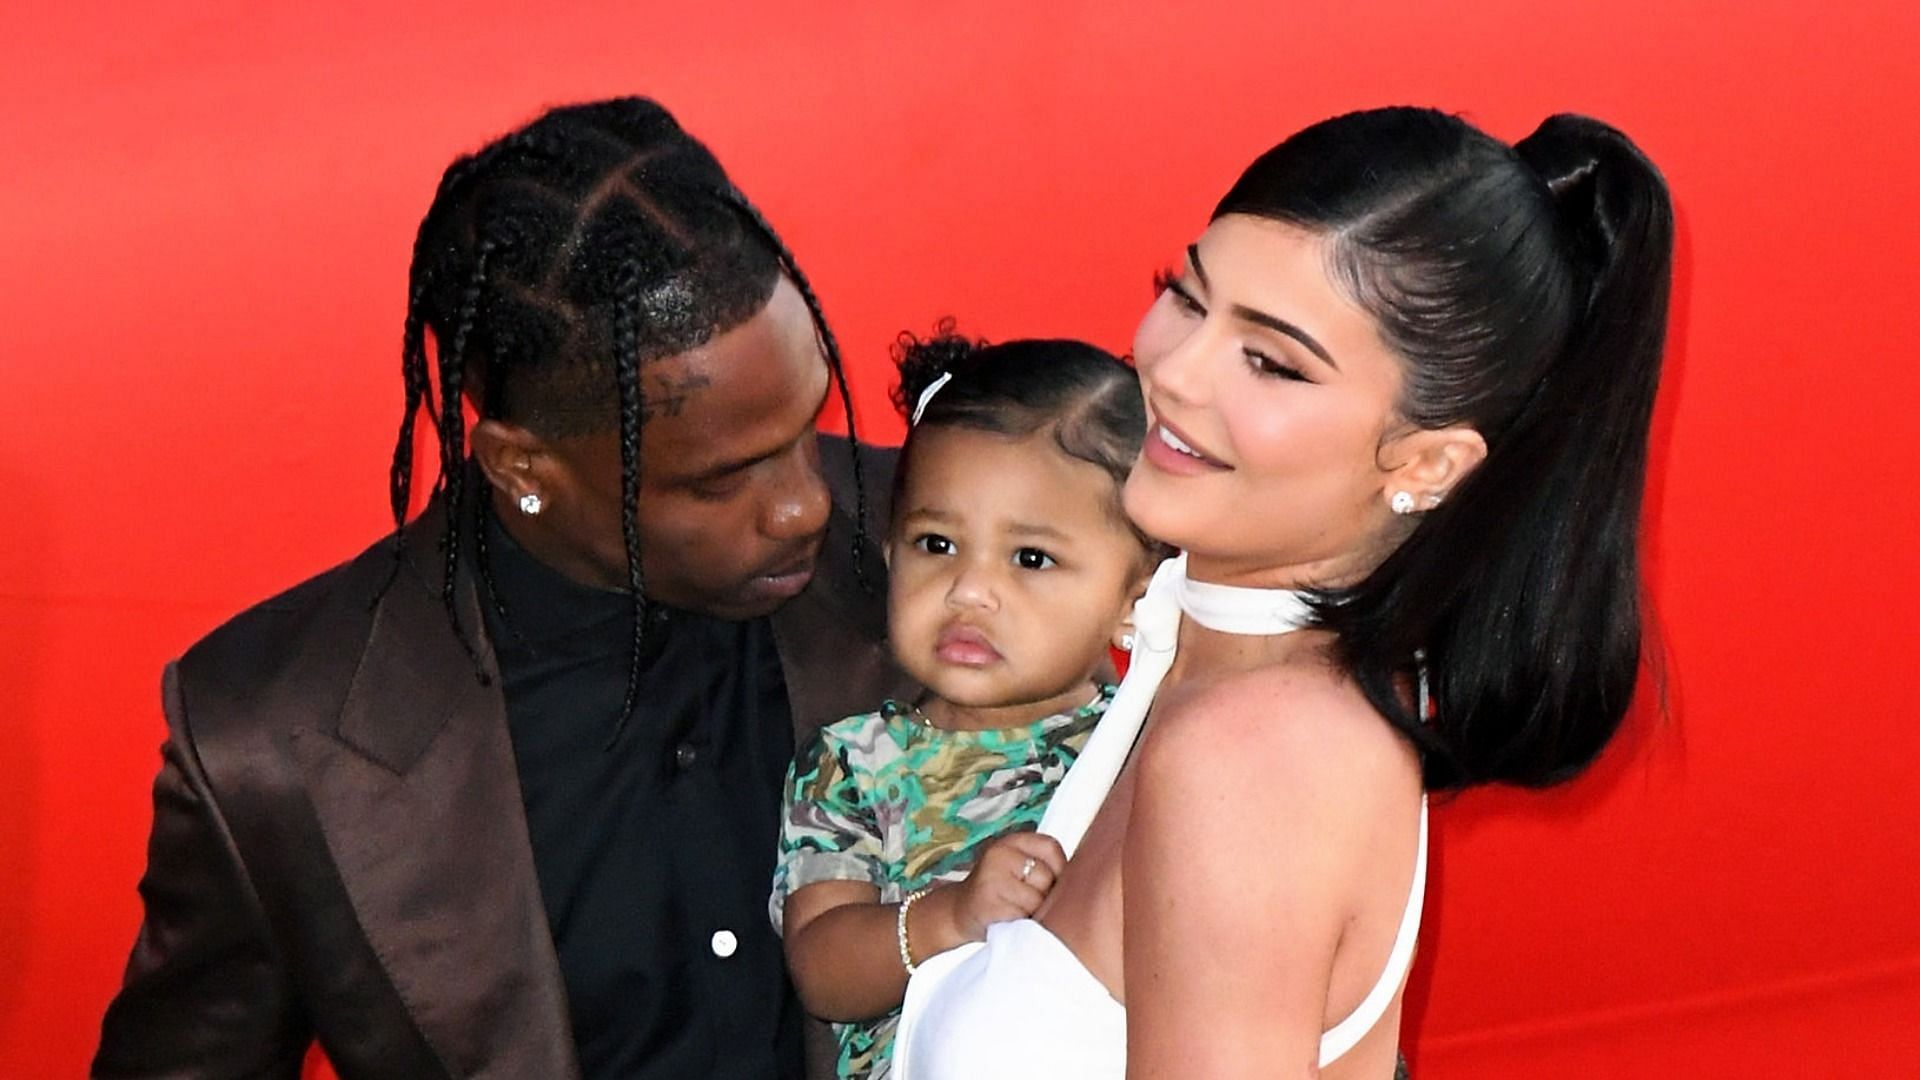 Kylie Jenner welcomed her second child with rapper Travis Scott on February 2, 2022 (Image via Getty Images/ Tommaso Boddi)